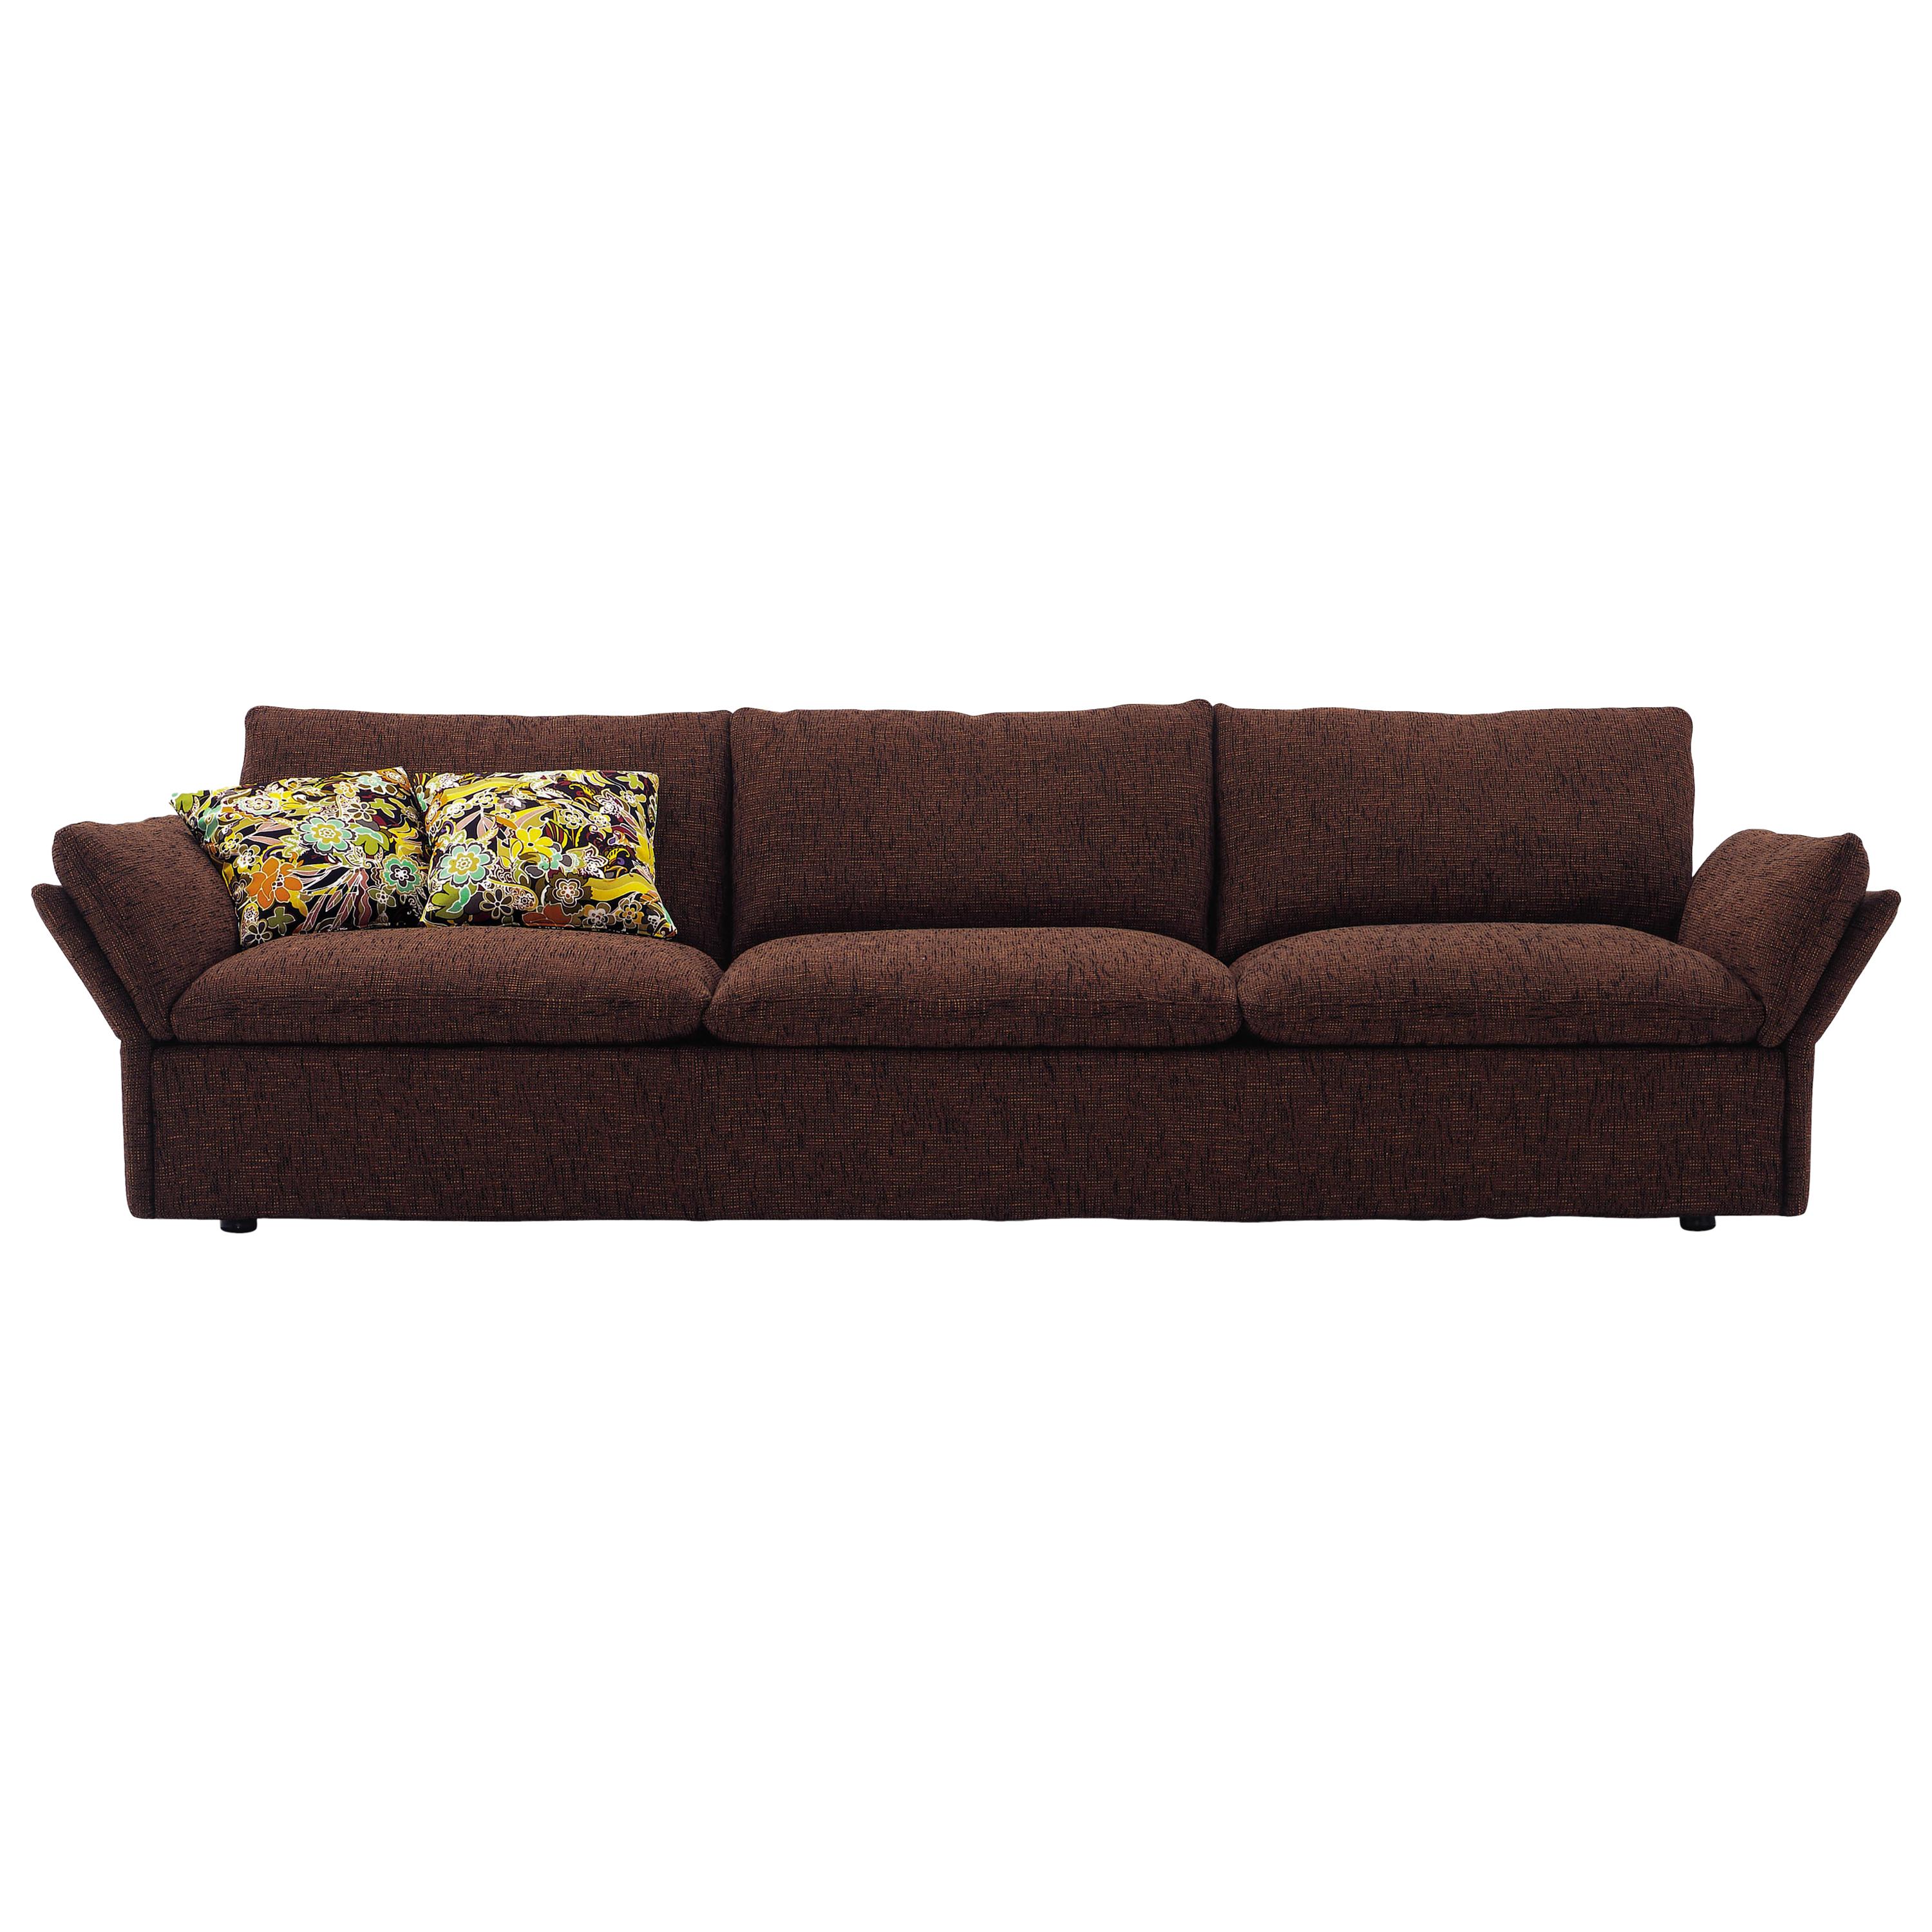 Nube Italia Tempt Sofa in Light Beige Fabric by Kemistry of Style For Sale